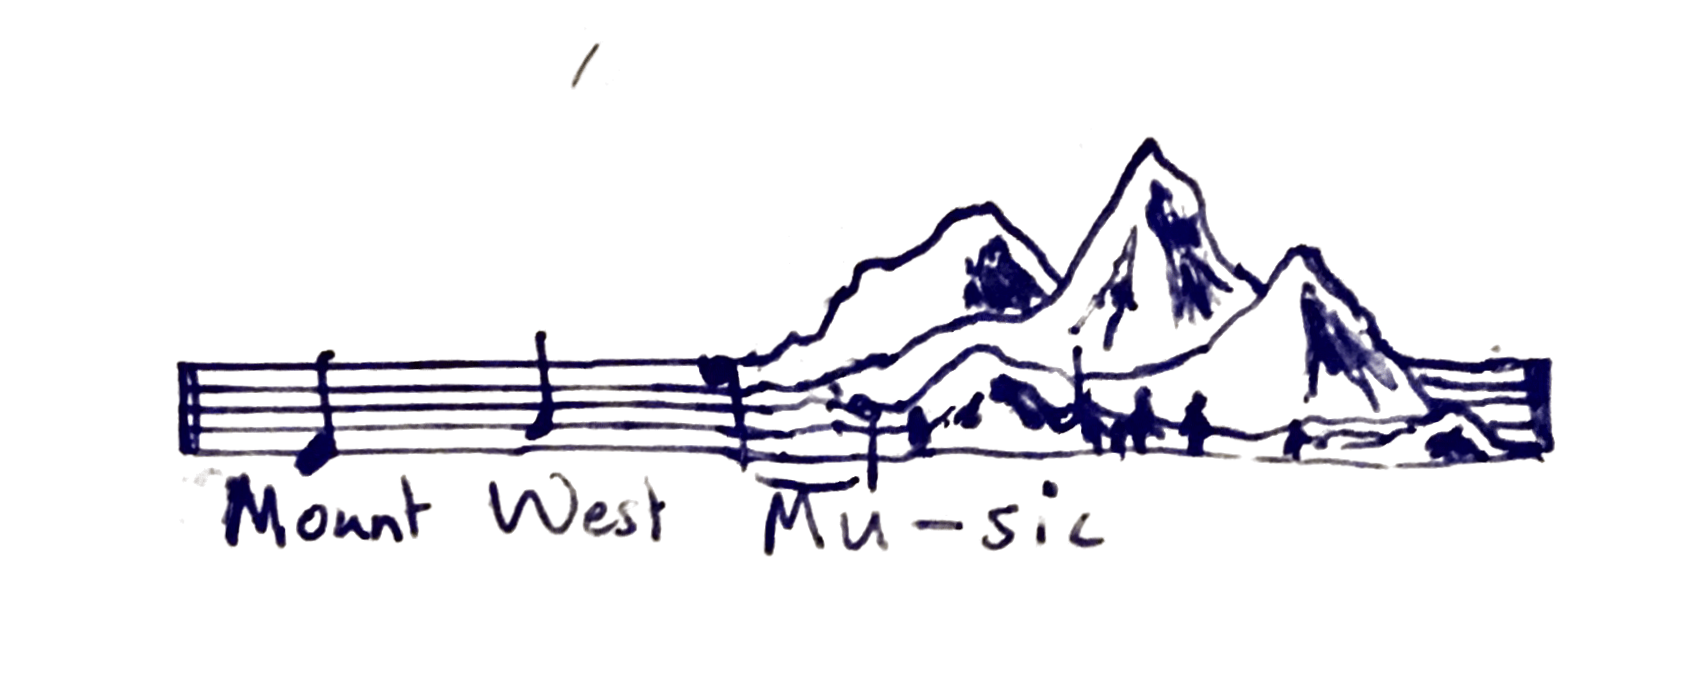 Logomark for award winning composer Mount West Music. The picture consists of a note staff that transforms into a mountain. Below the notes in the staff you can find the text "Mount West Music".